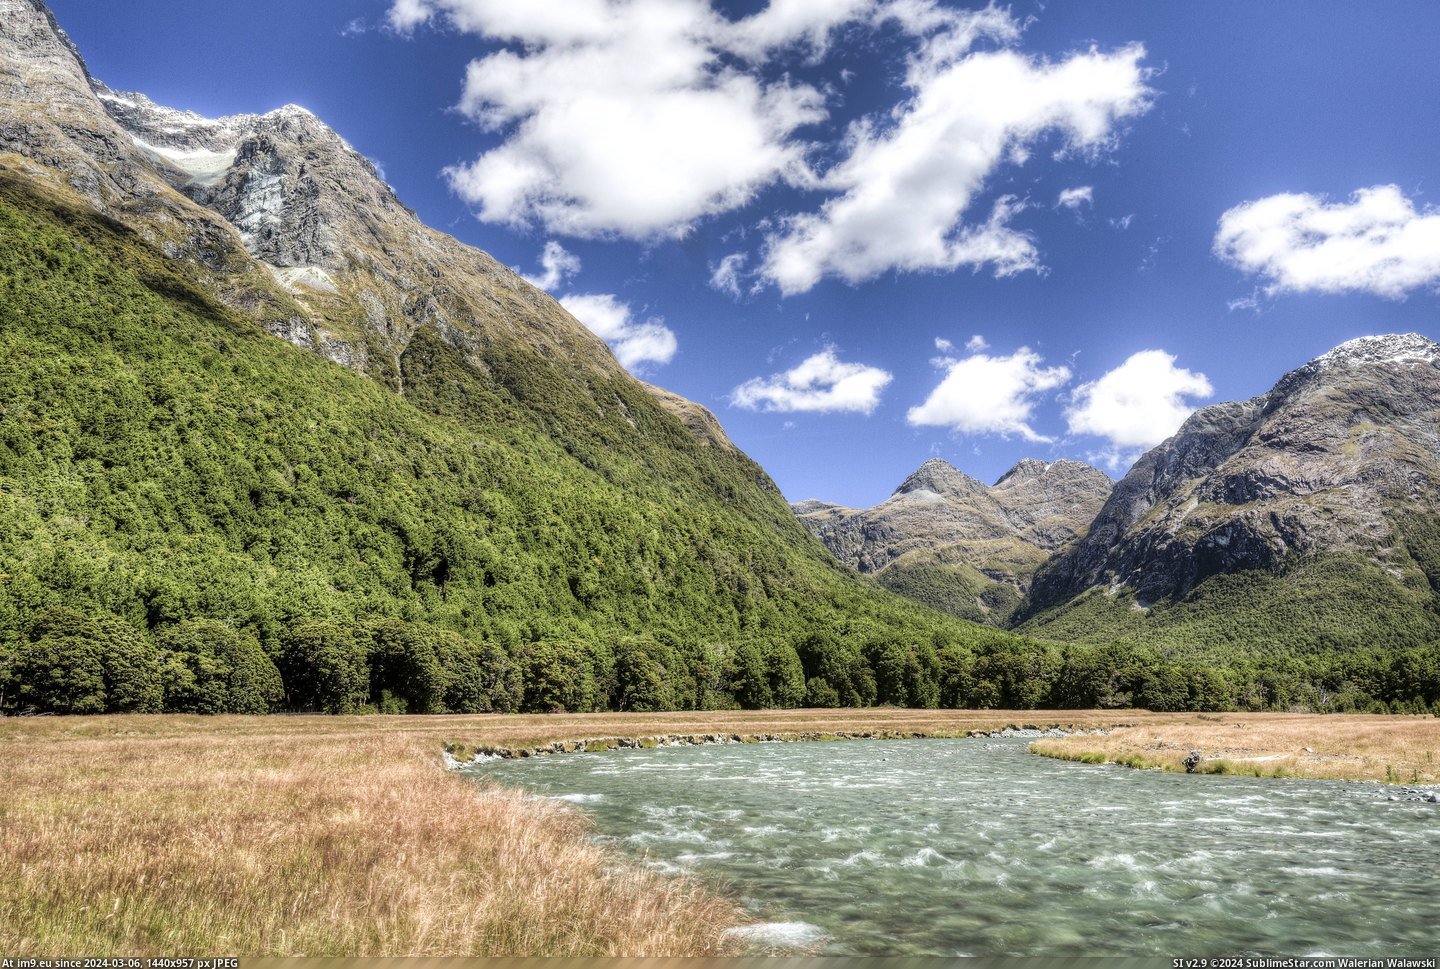 #One #Park #National #Mountains #Eye #Fiordland #Valley #River #Forest [Earthporn] River, Grassland, Forest, and Mountains of the Caples Valley, Fiordland National Park  [5558x3704] [One Lidless Eye] Pic. (Bild von album My r/EARTHPORN favs))